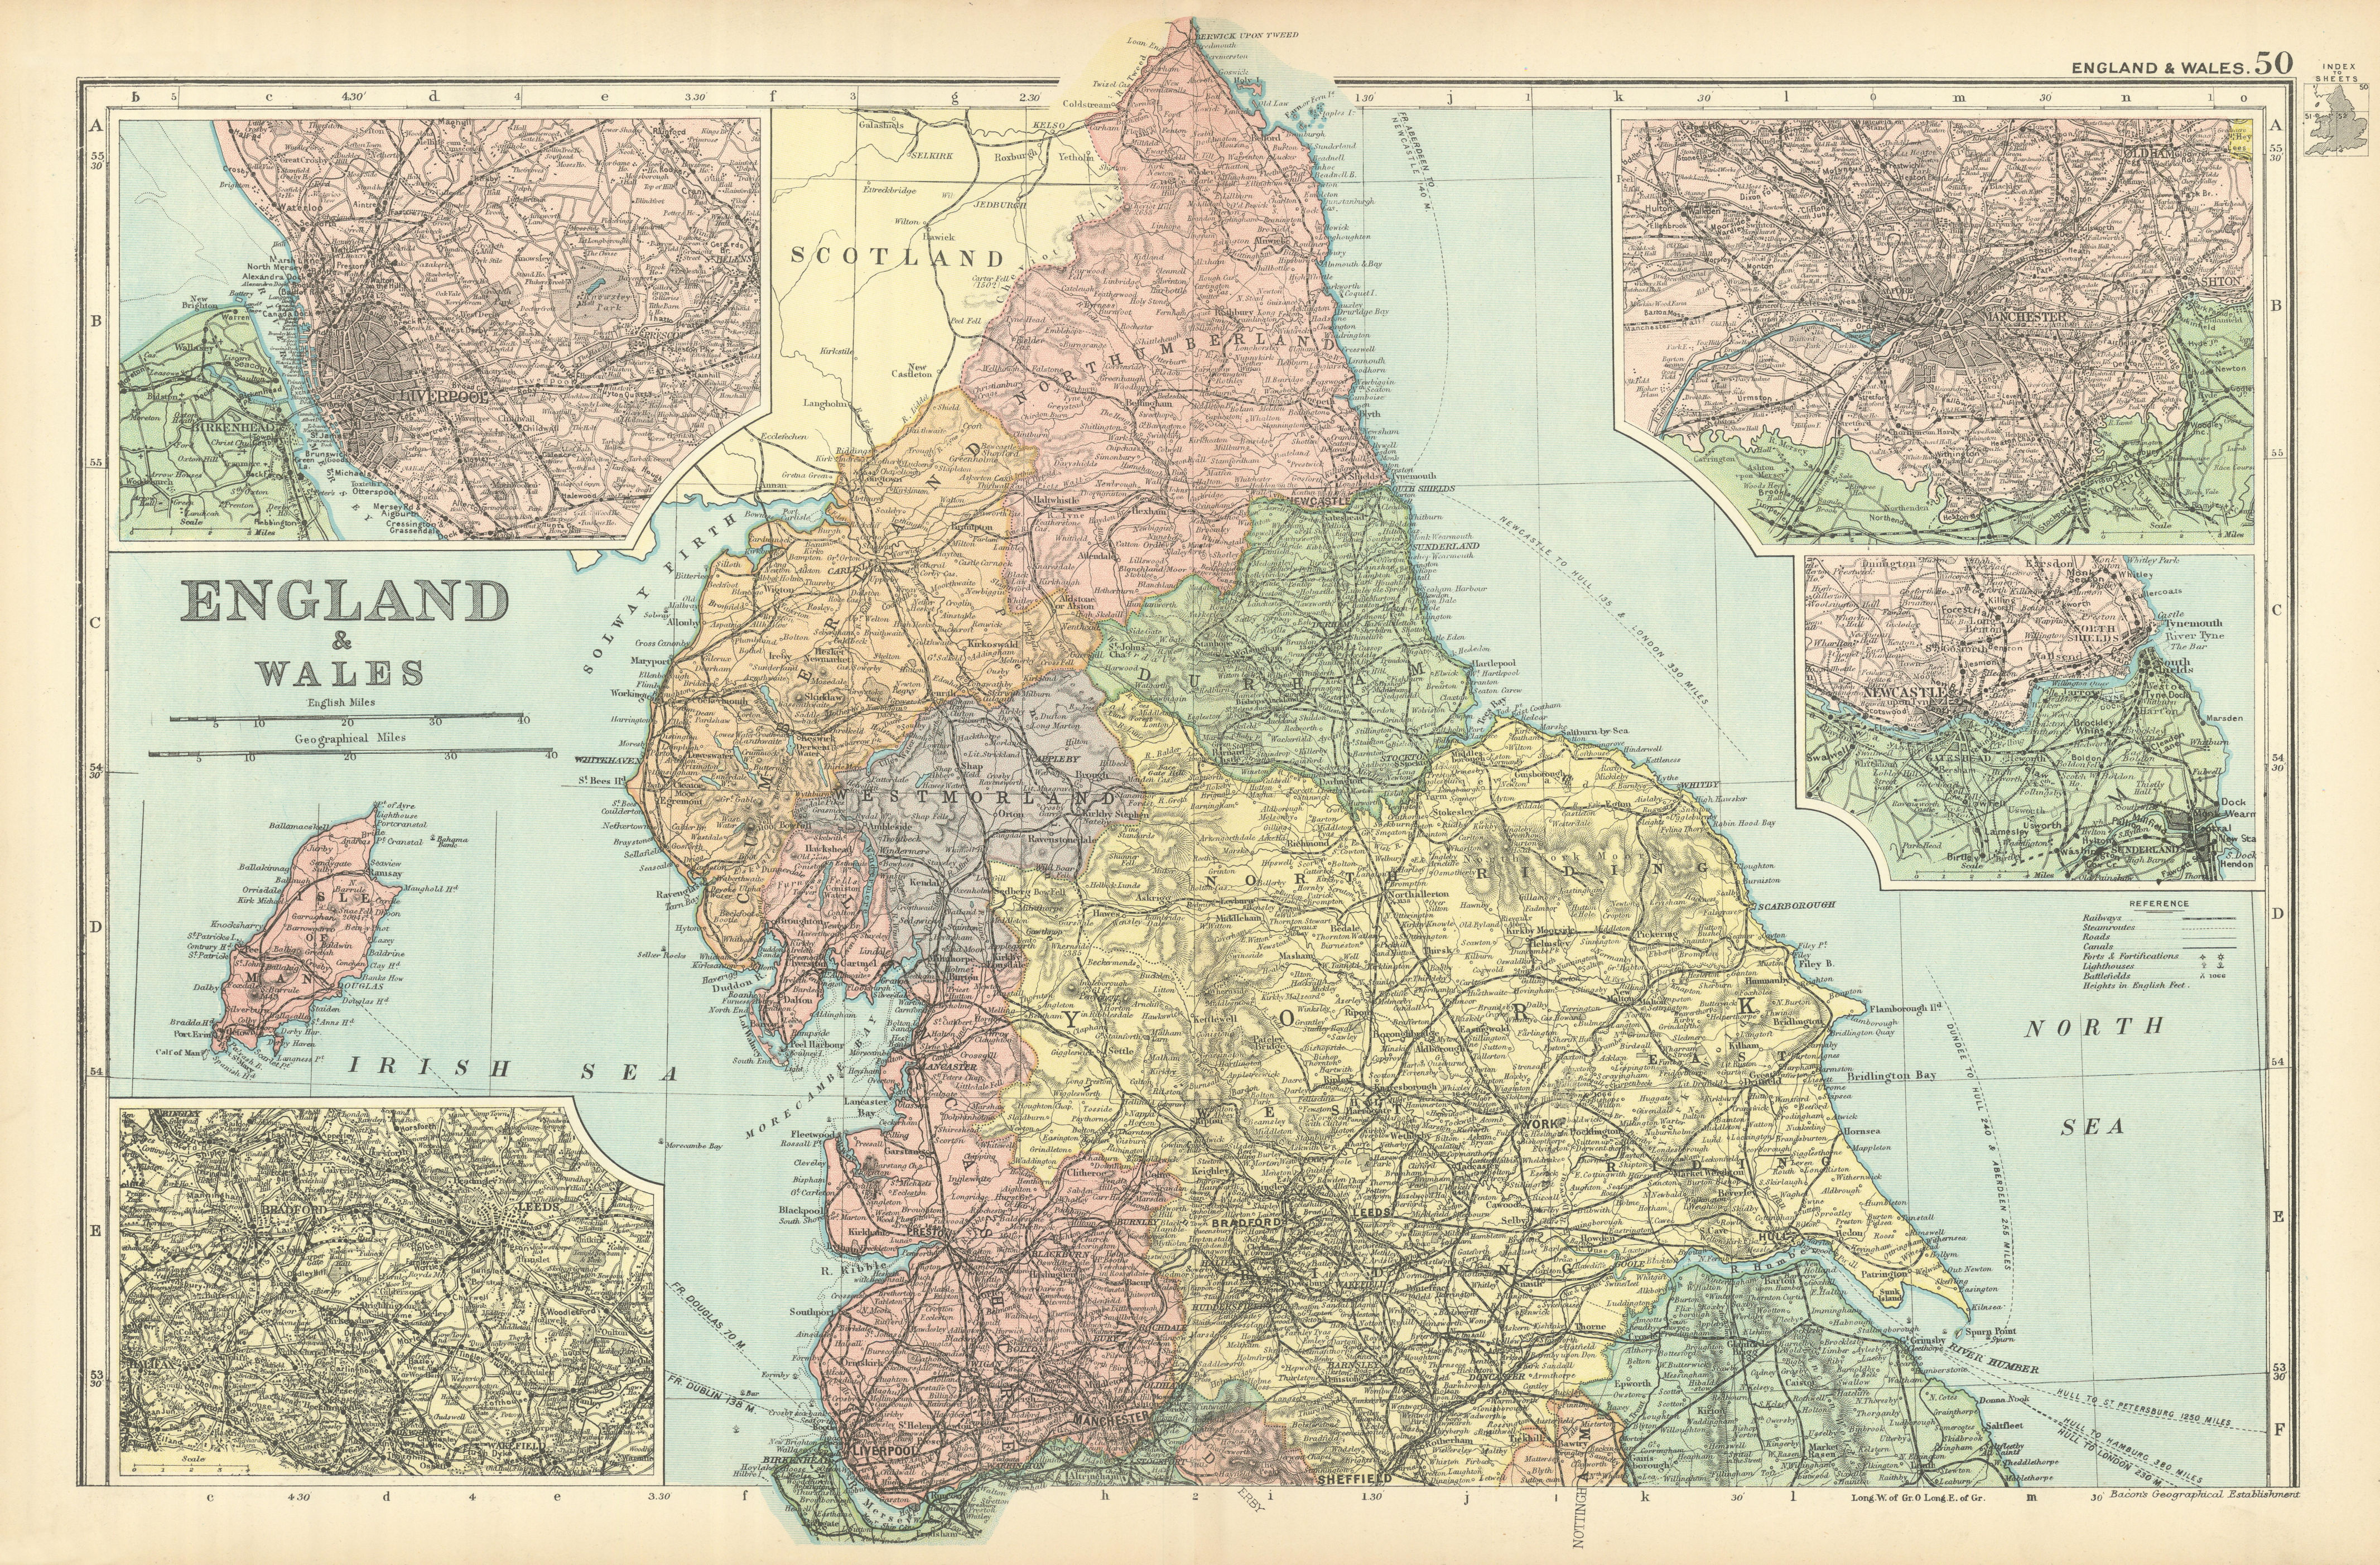 Associate Product NORTHERN ENGLAND Liverpool Leeds Manchester Newcastle environs. BACON 1898 map